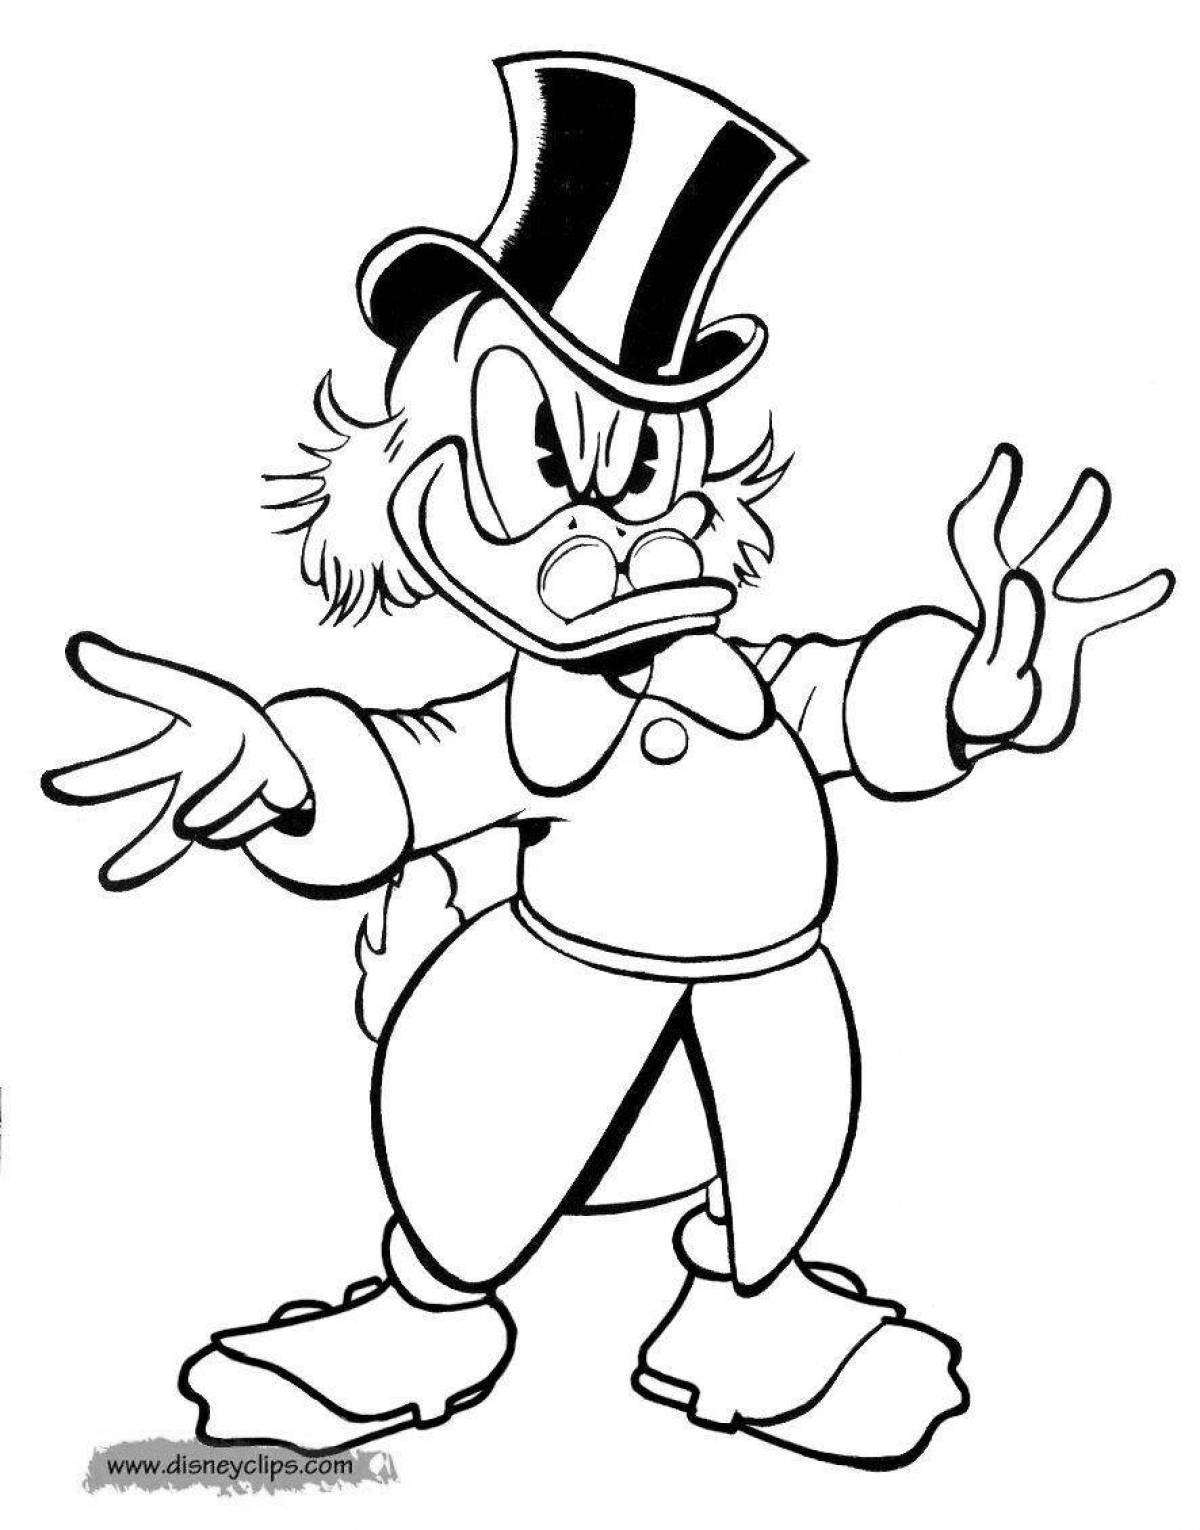 Charming scrooge coloring page